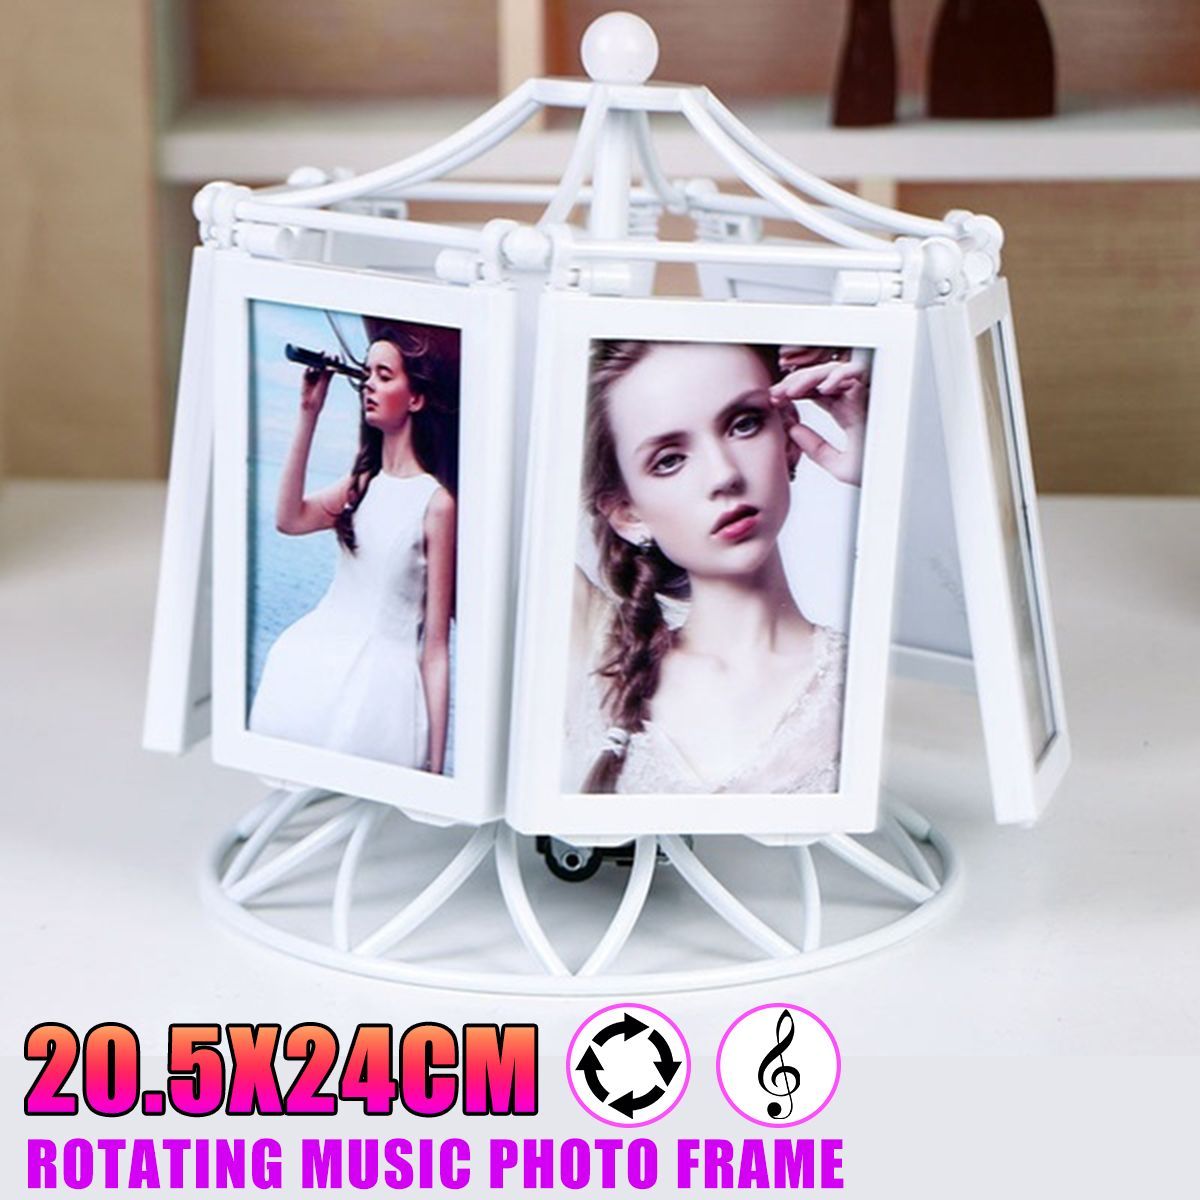 Rotating-Music-Box-Photo-Frame-Picture-Display-for-12-photos-Wedding-Graduation-1629784